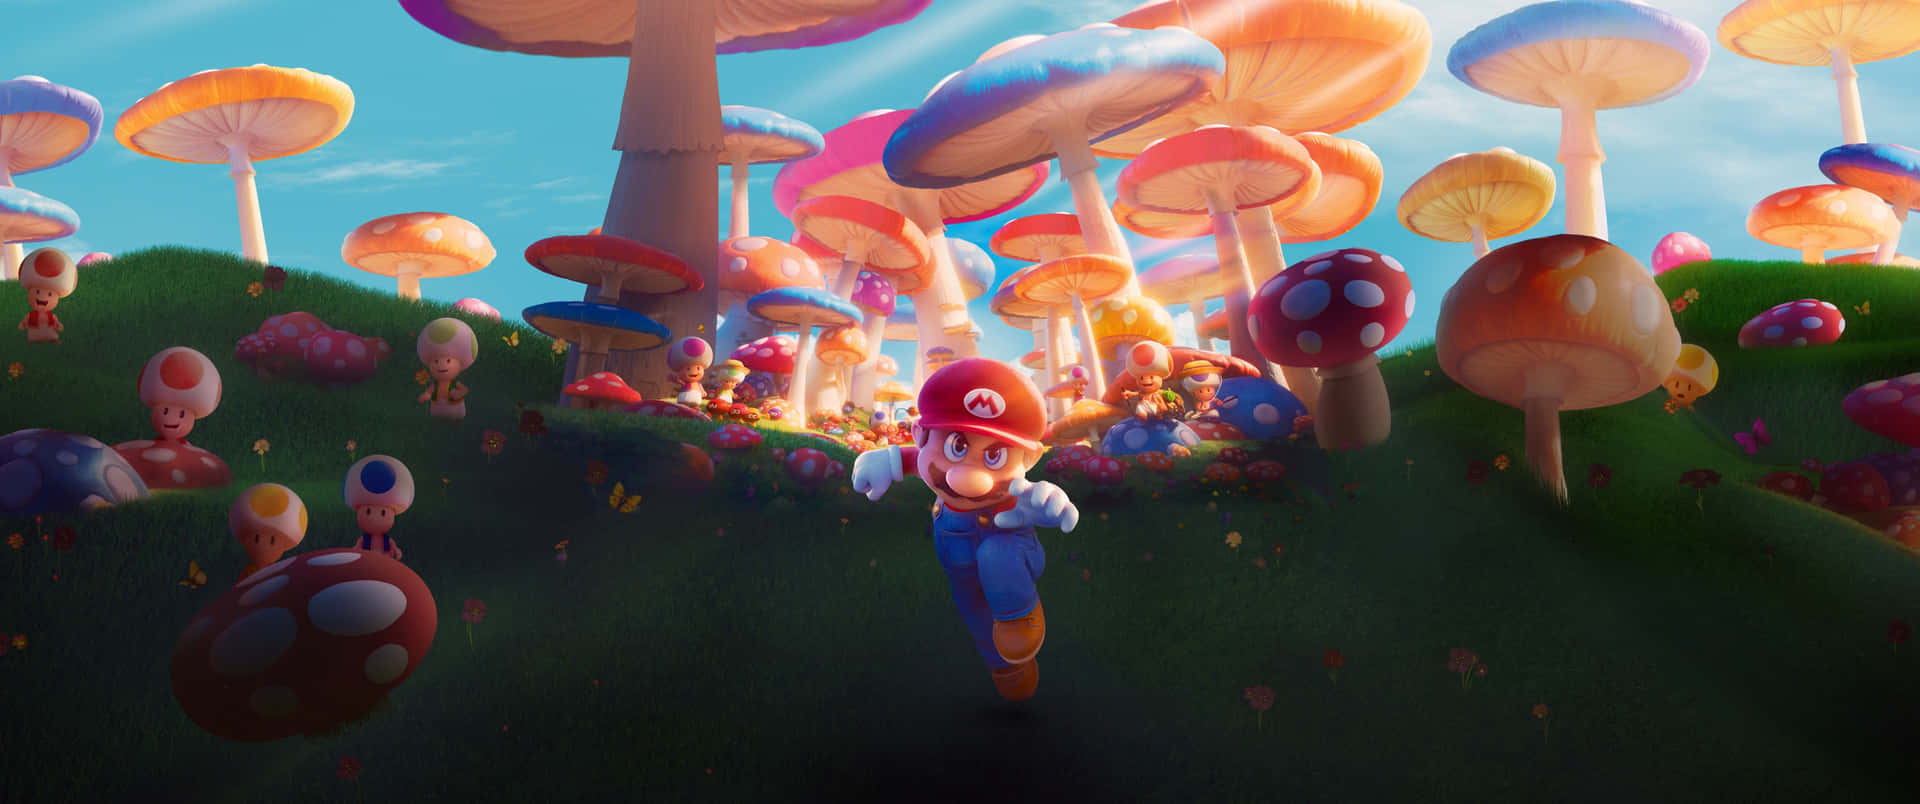 Mario And Mushrooms In A Field Wallpaper